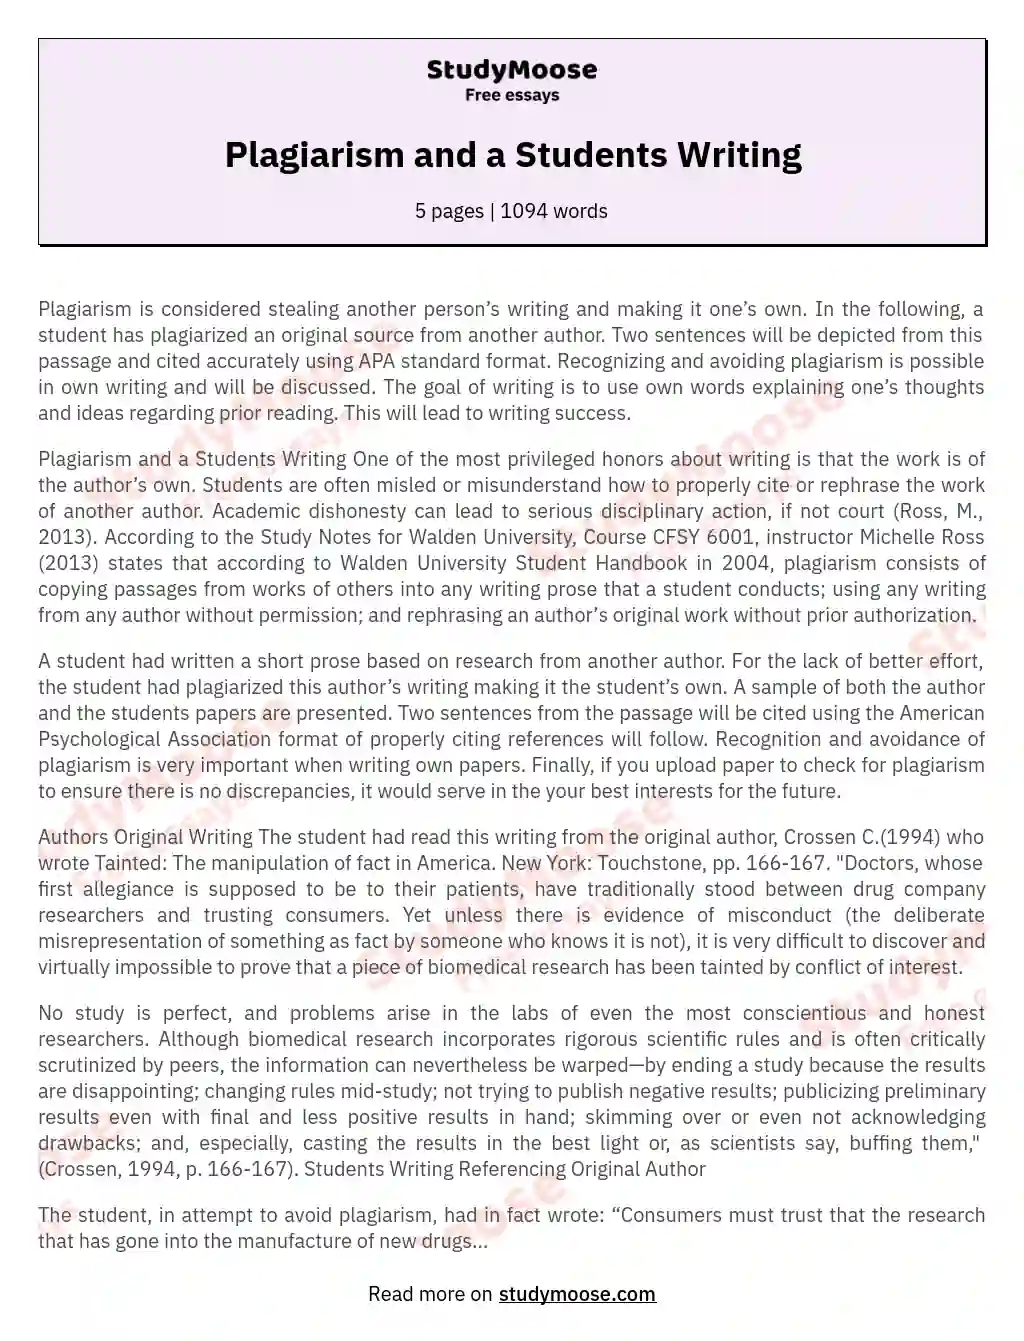 Plagiarism and a Students Writing